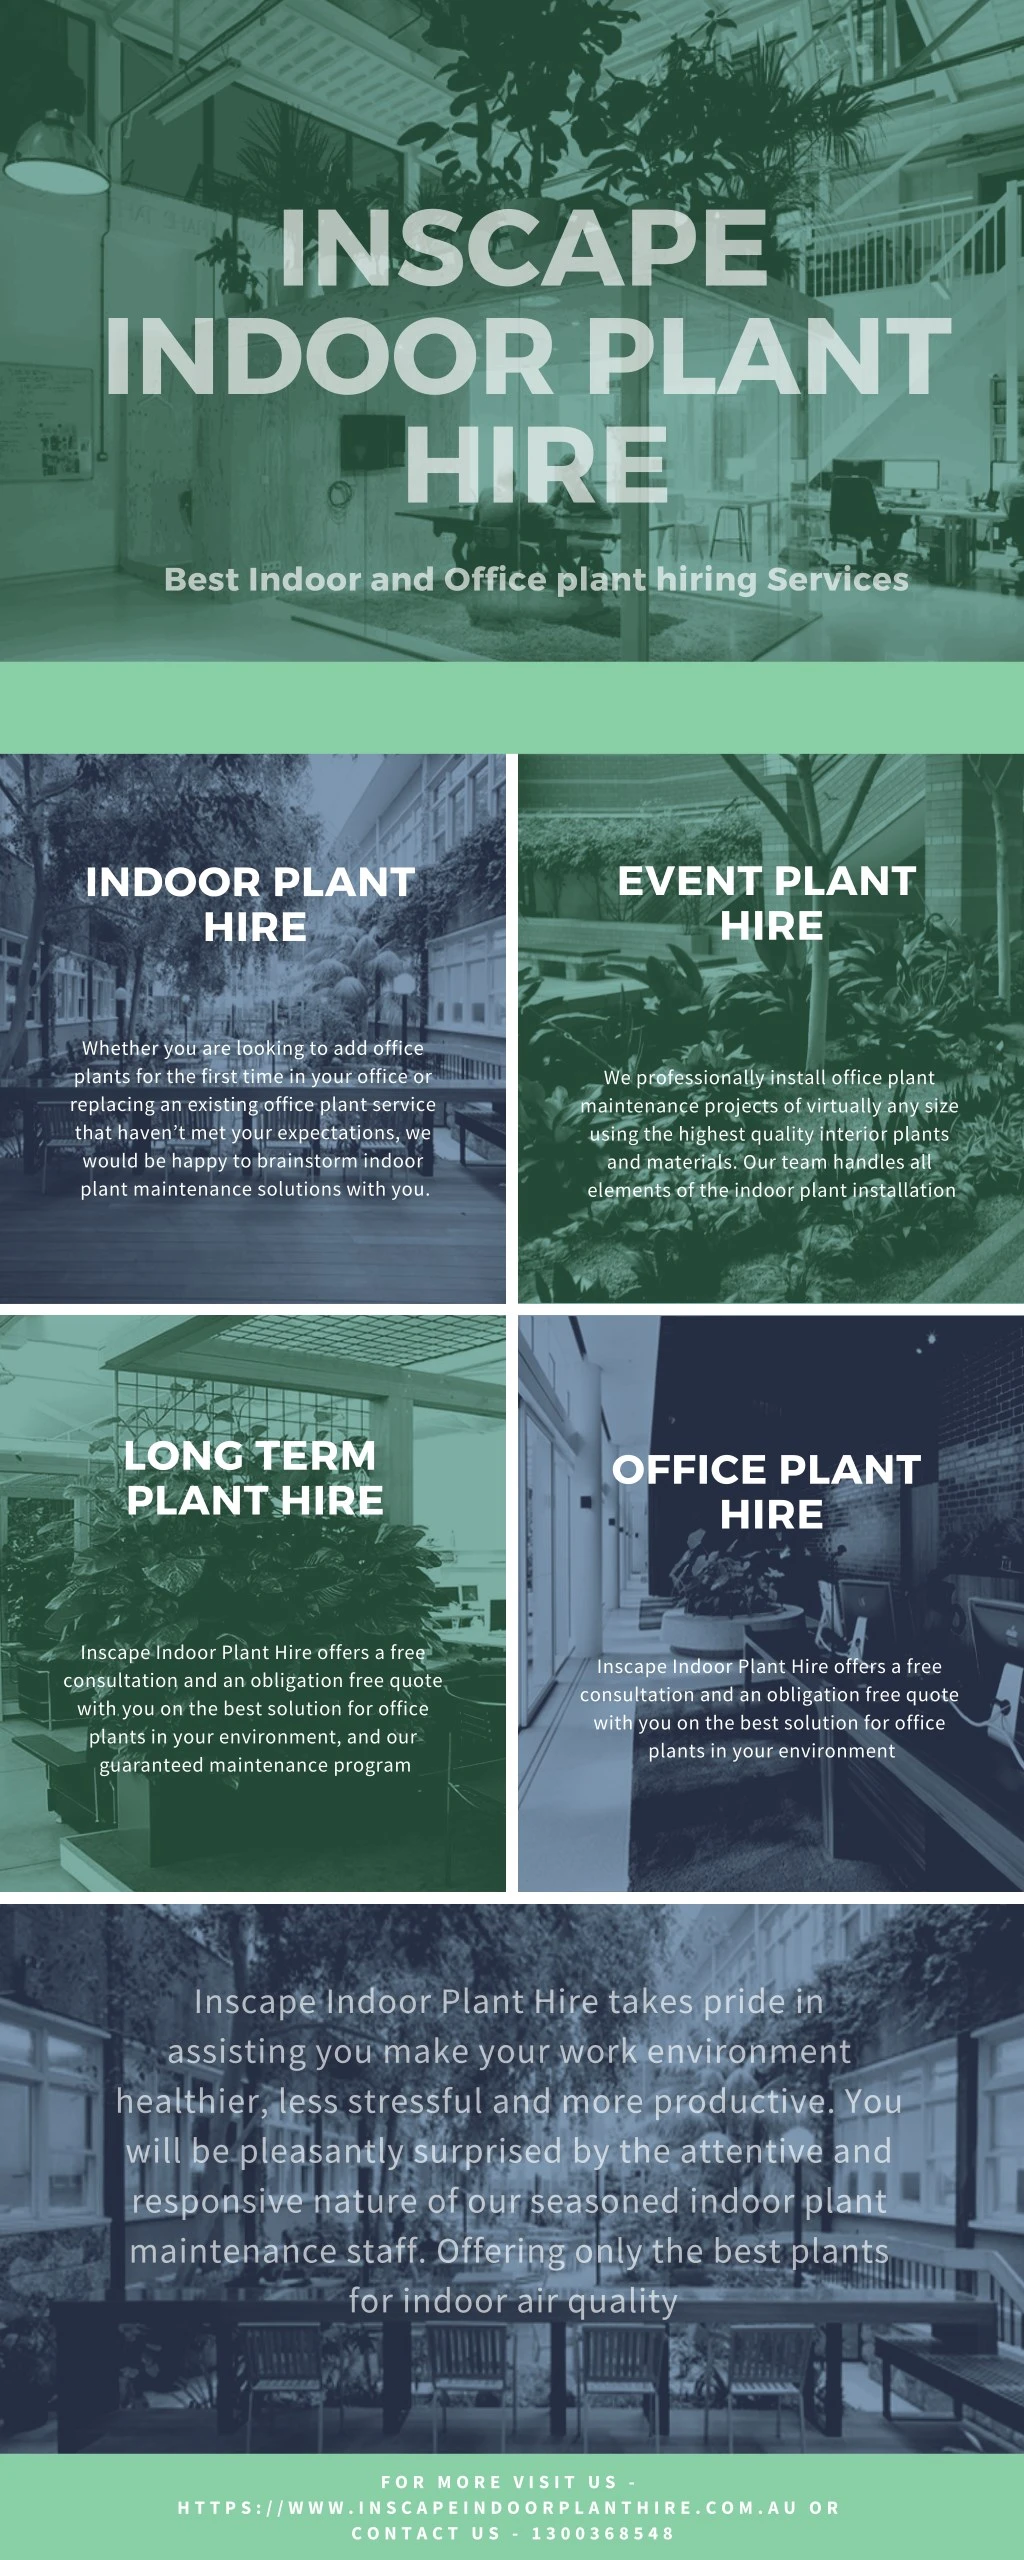 inscape indoor plant hire